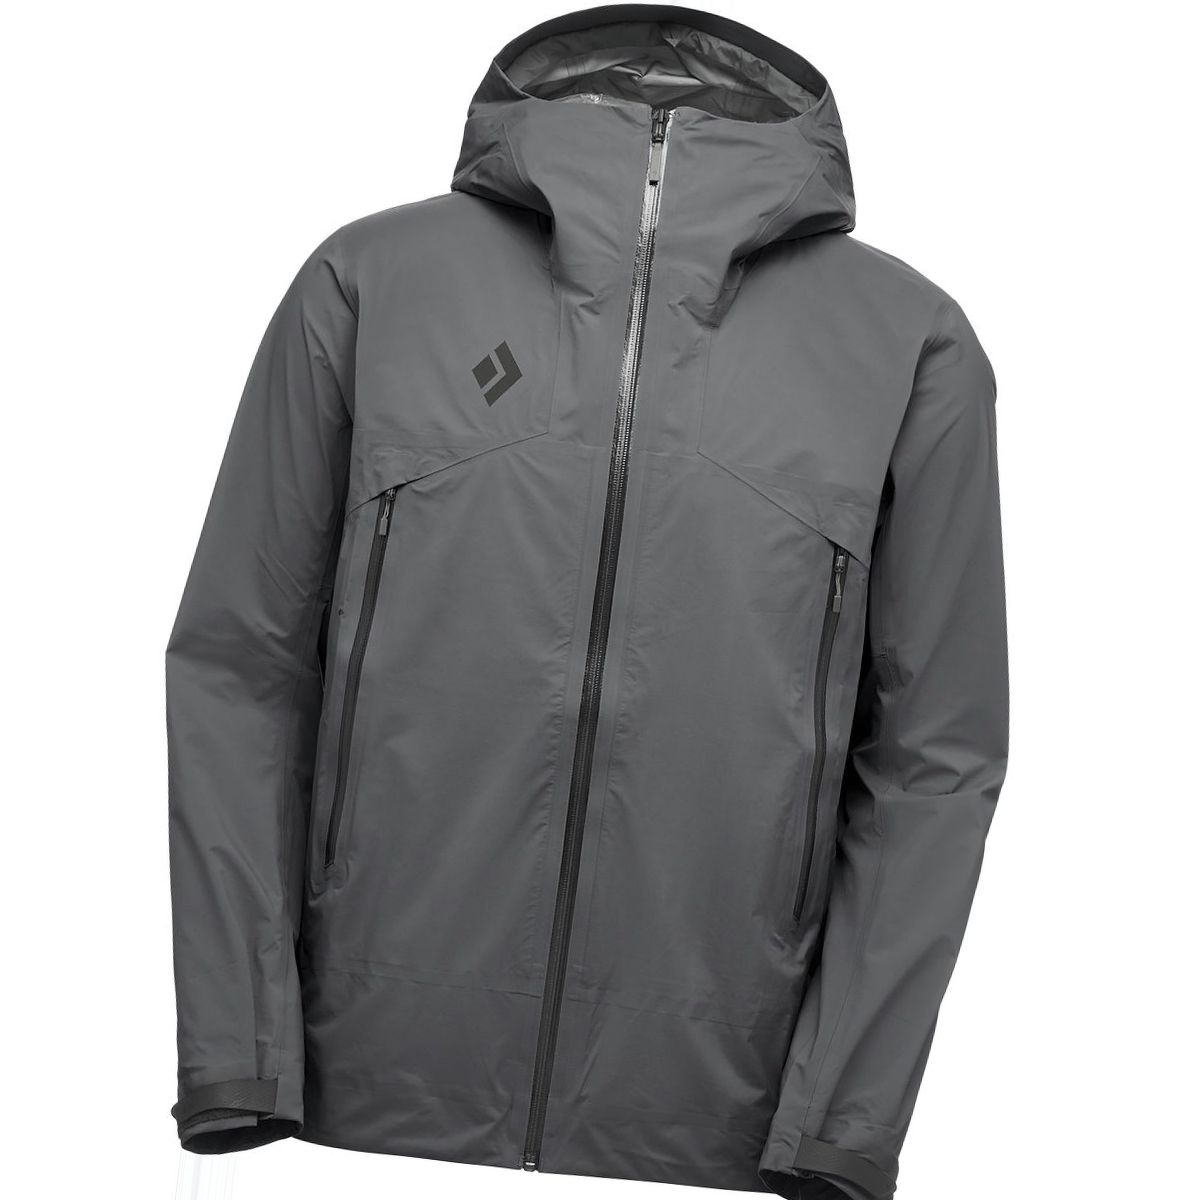 Top ofthe men's ski equipment & wear for the best outdoor — Outdoormiks